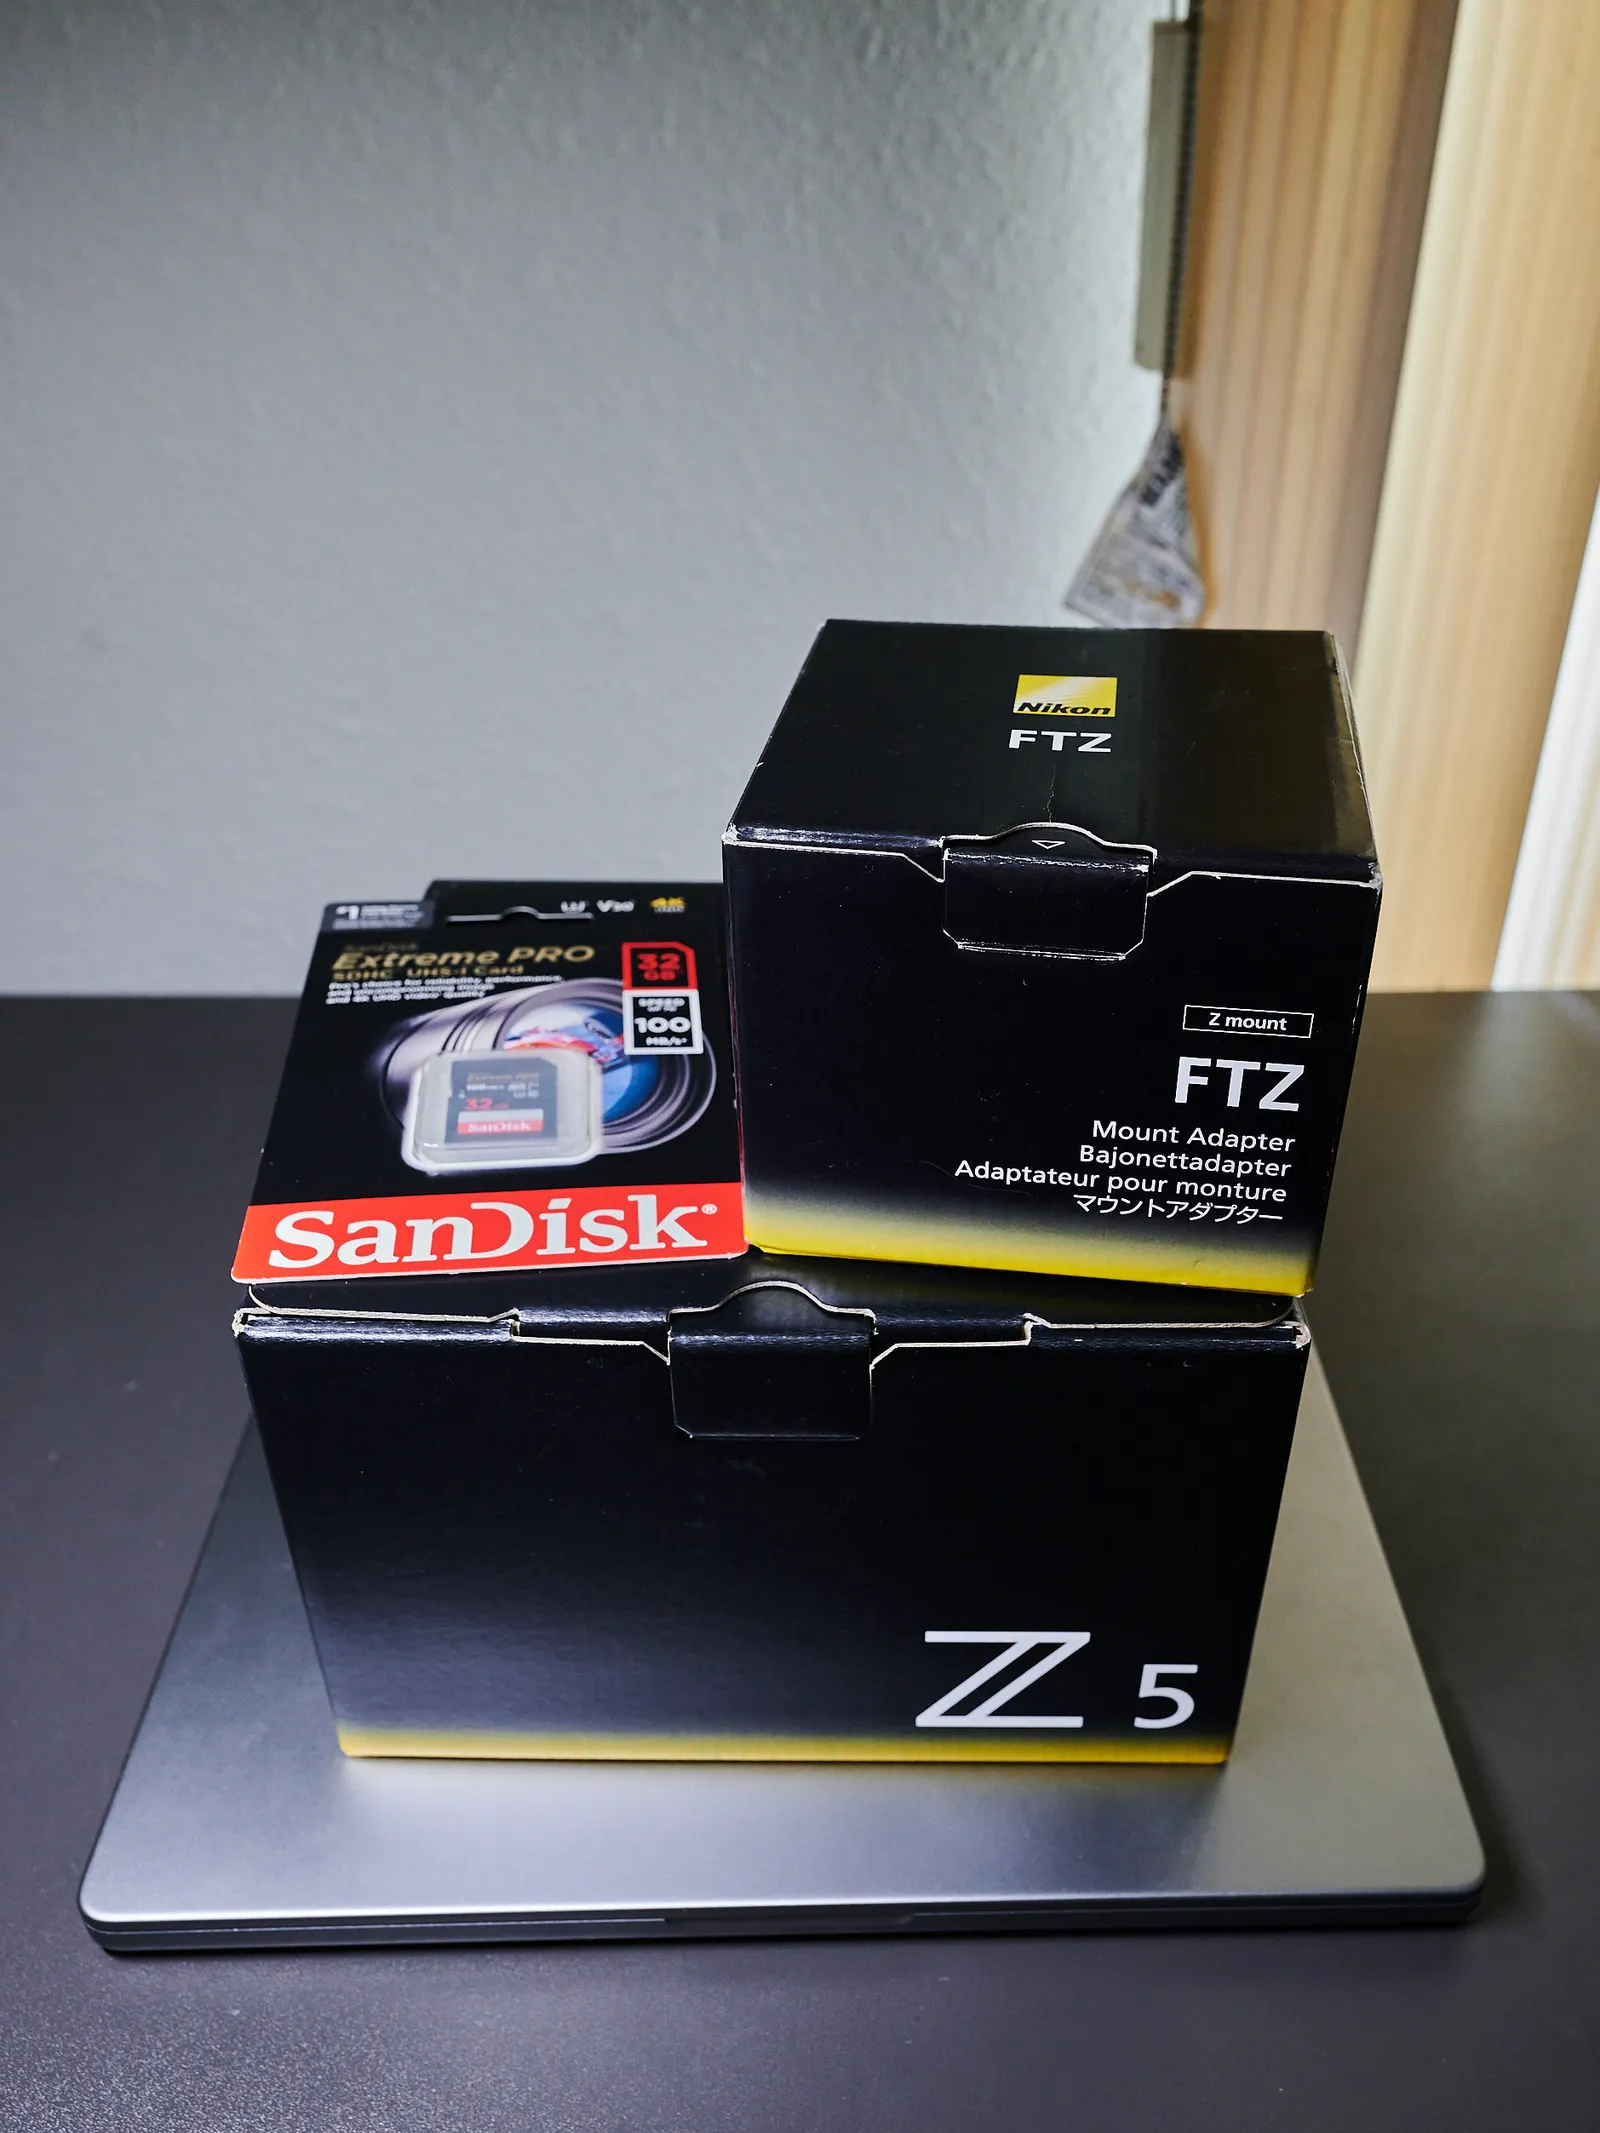 Nikon Z5 Full Frame Mirrorless Camera Body with FTZ Adapter - just 